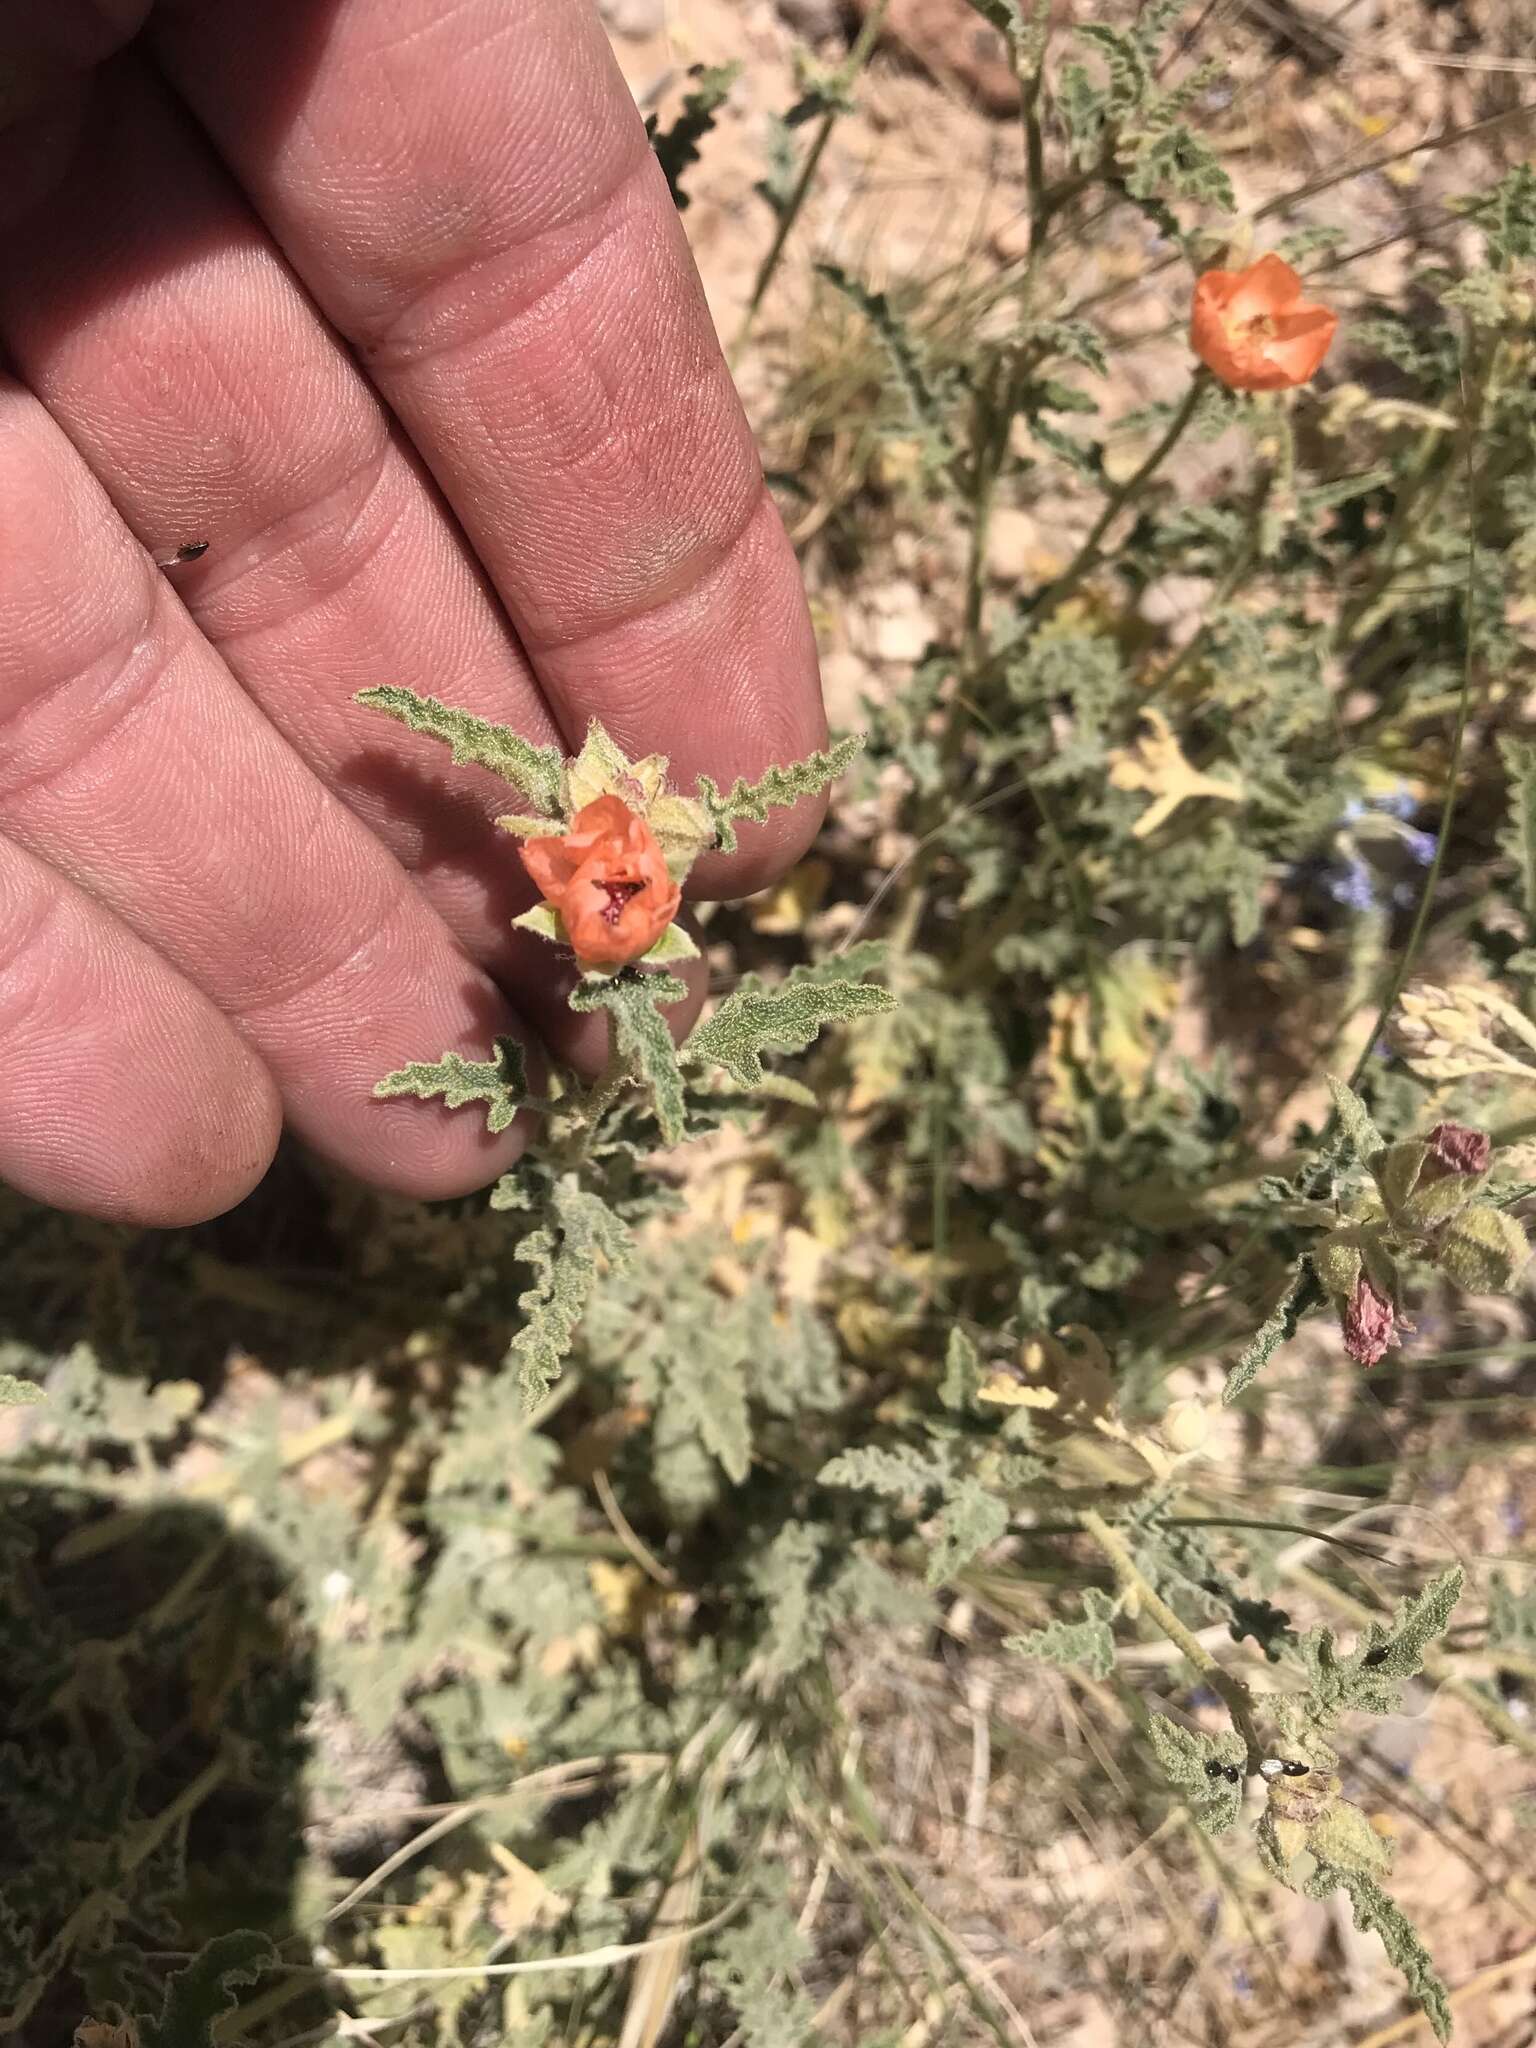 Image of spear globemallow